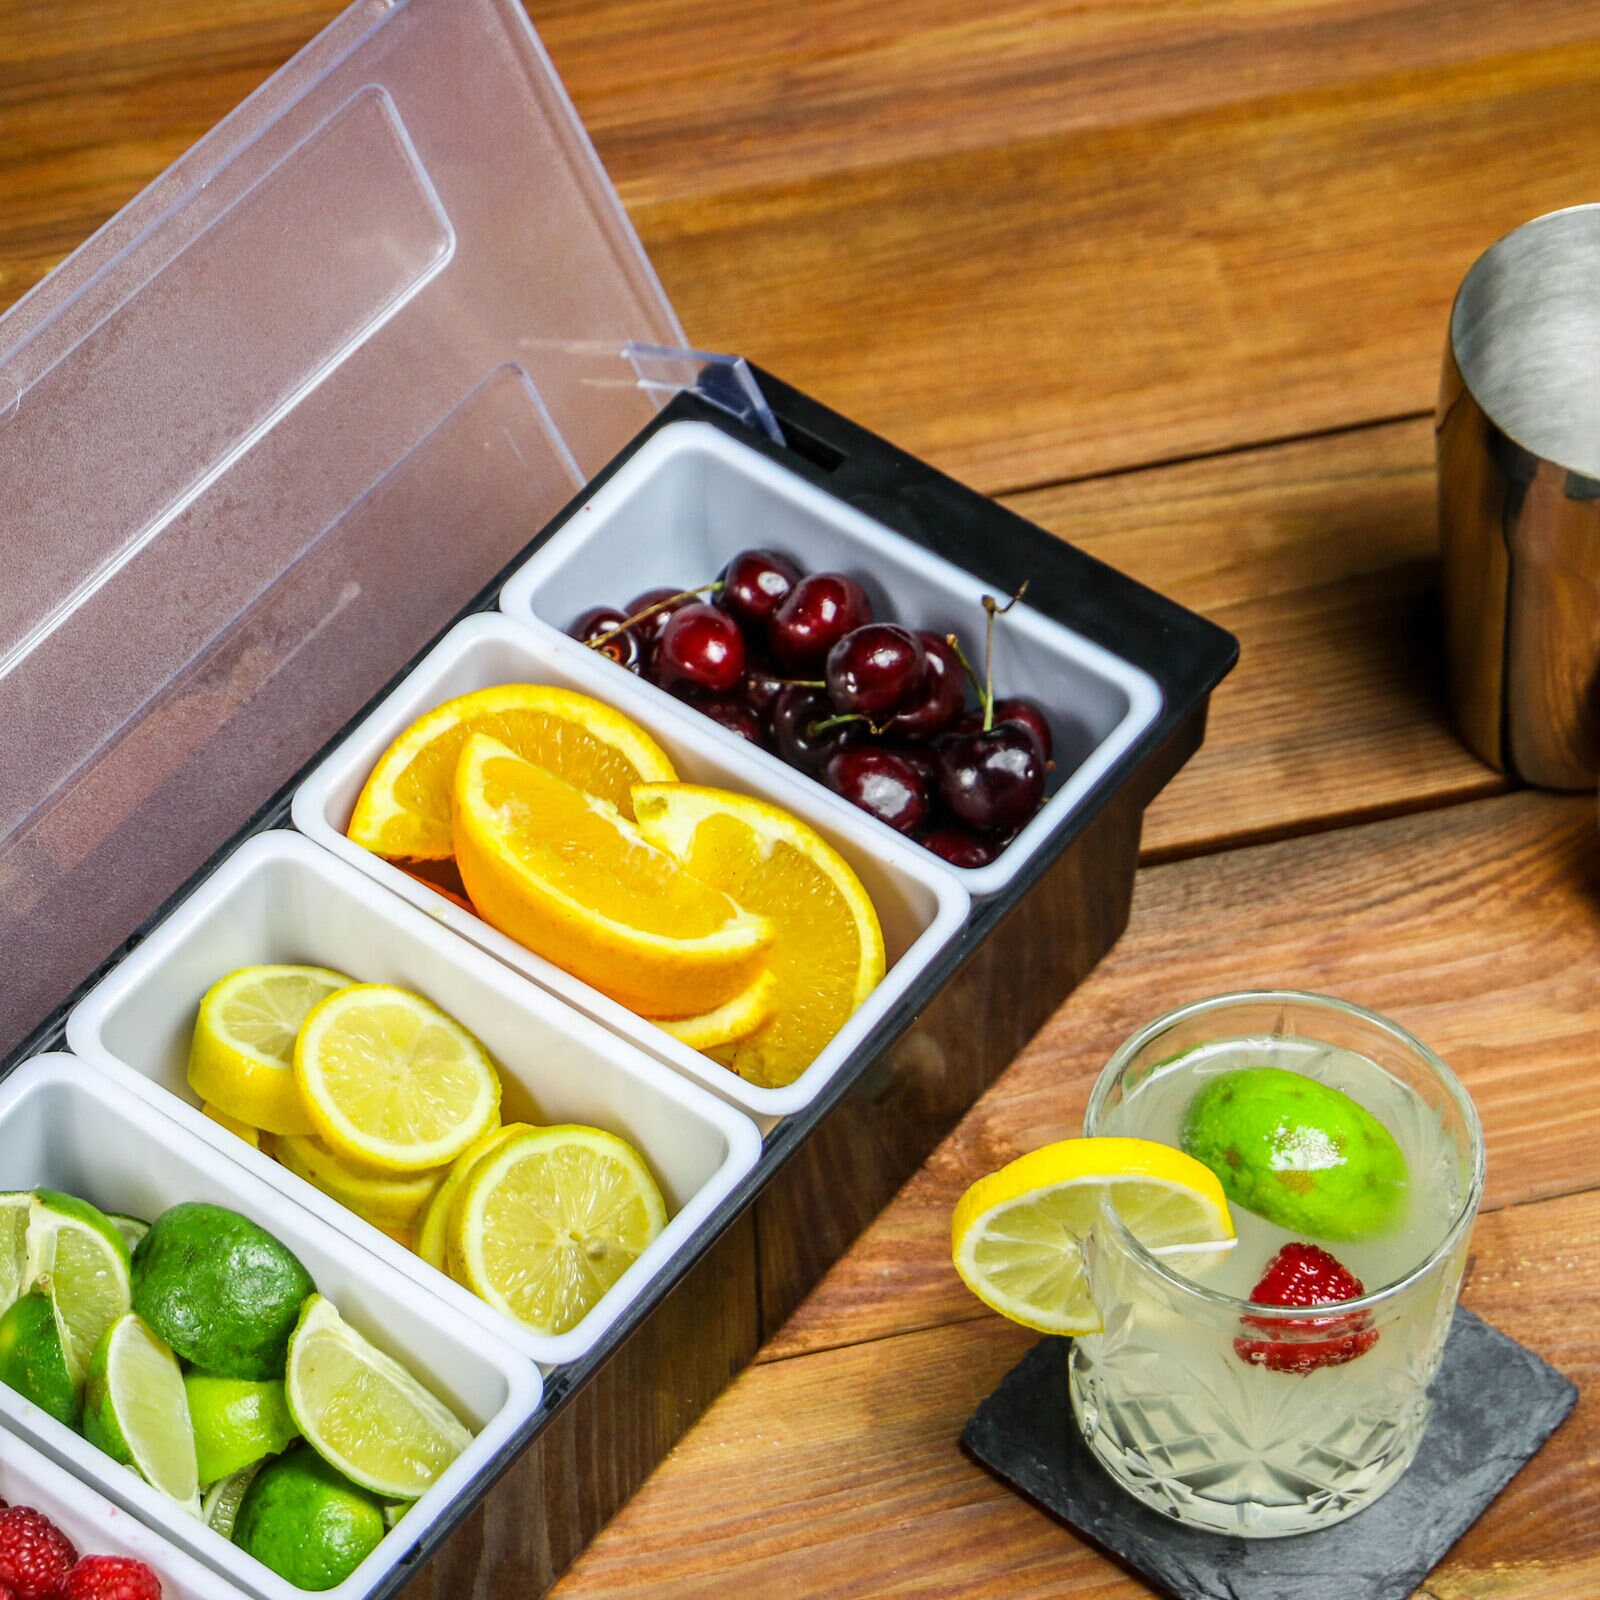 Bar Garnish Tray in Stainless Steel - 6 Compartments